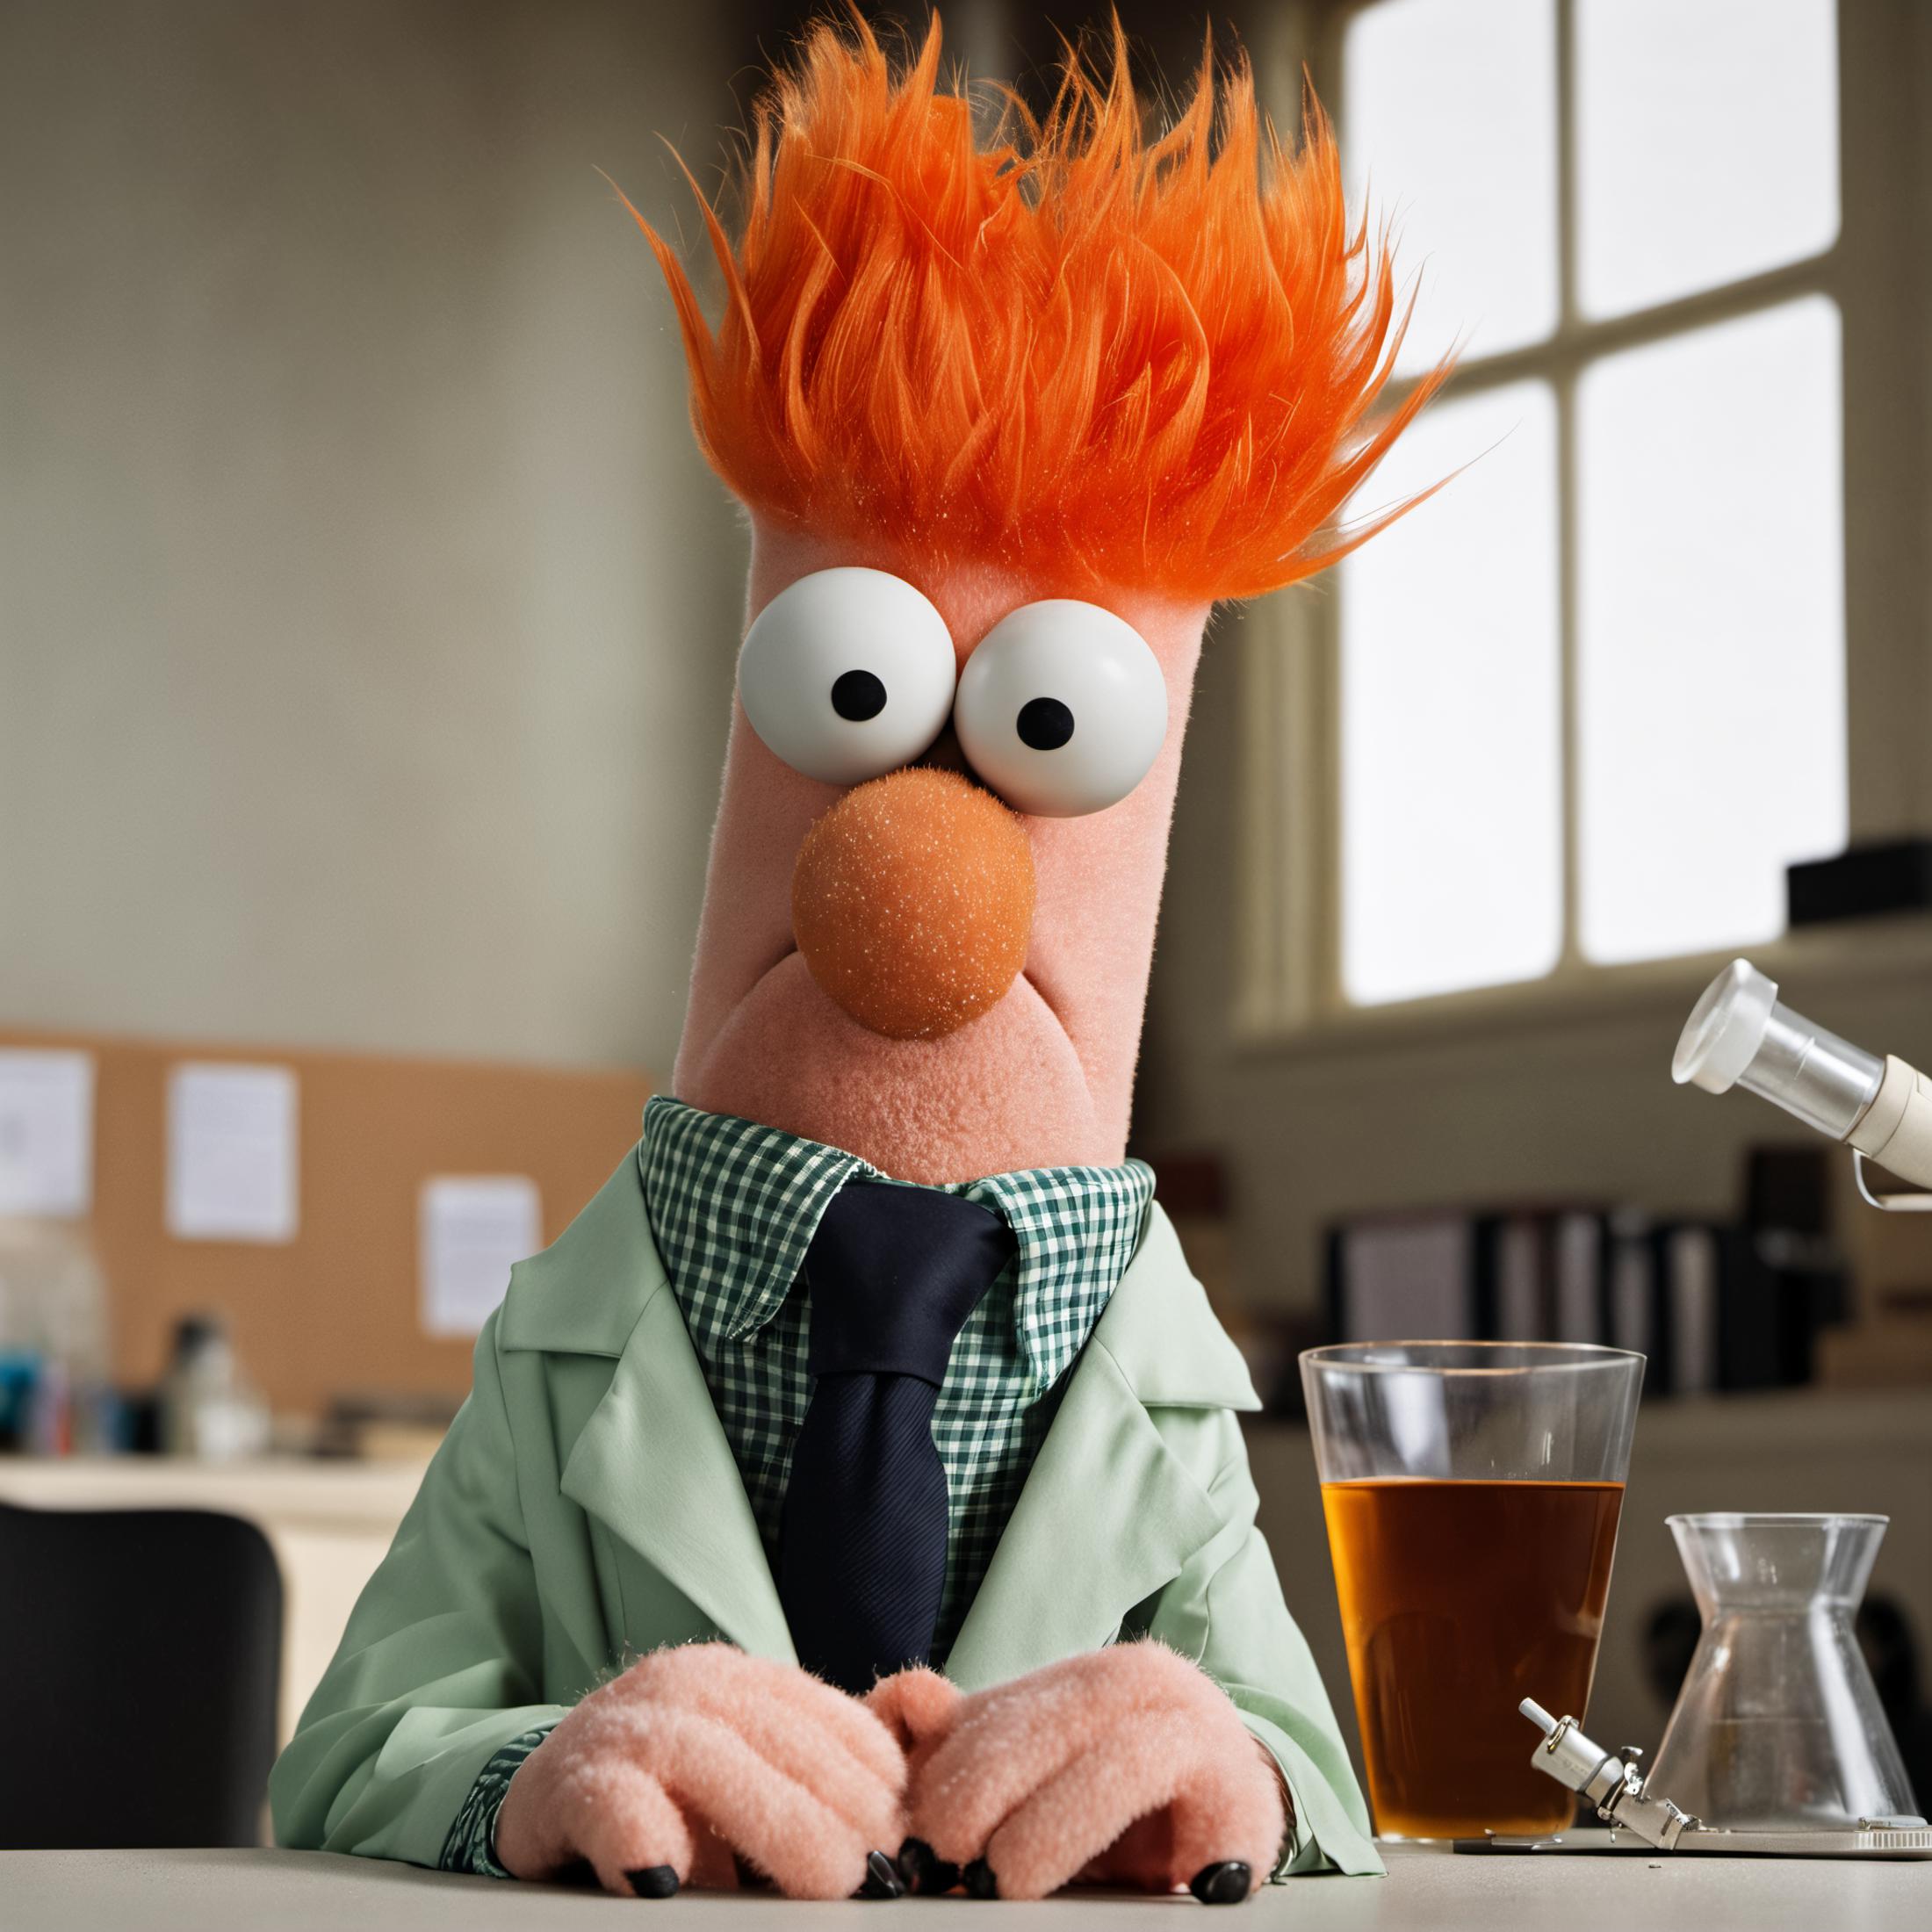 A Muppet with red hair and a green shirt sitting at a desk with a beaker and cup.